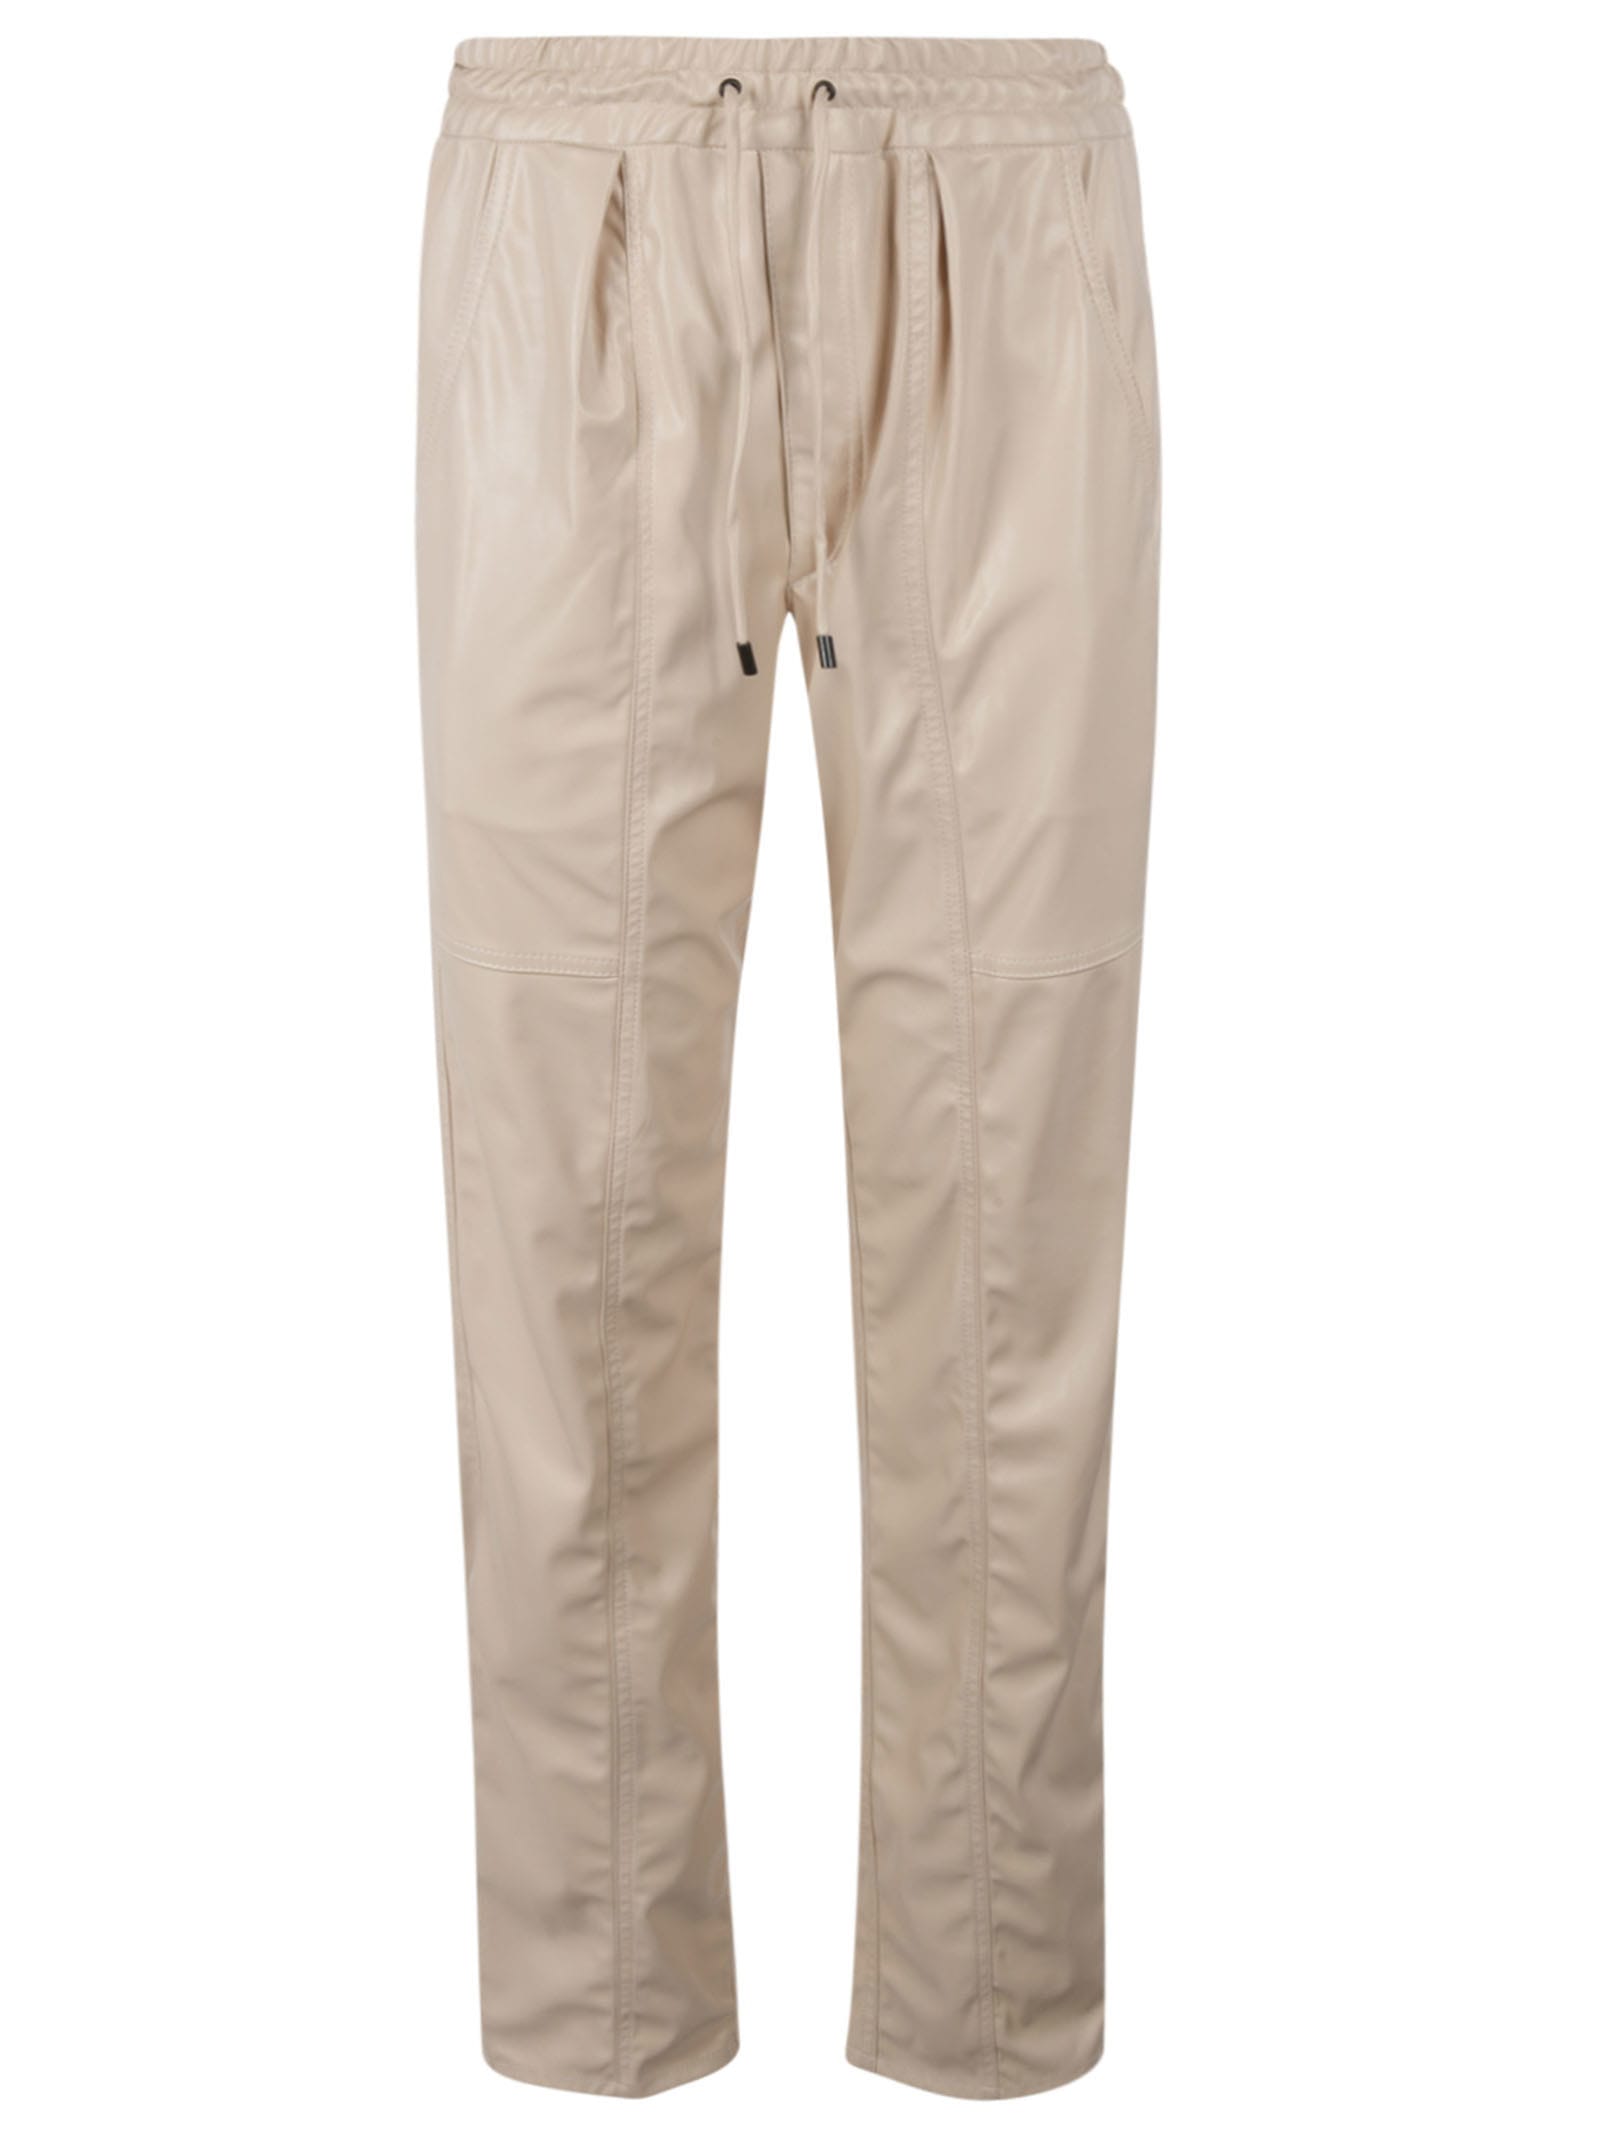 MARANT ETOILE LACED STRAIGHT TROUSERS